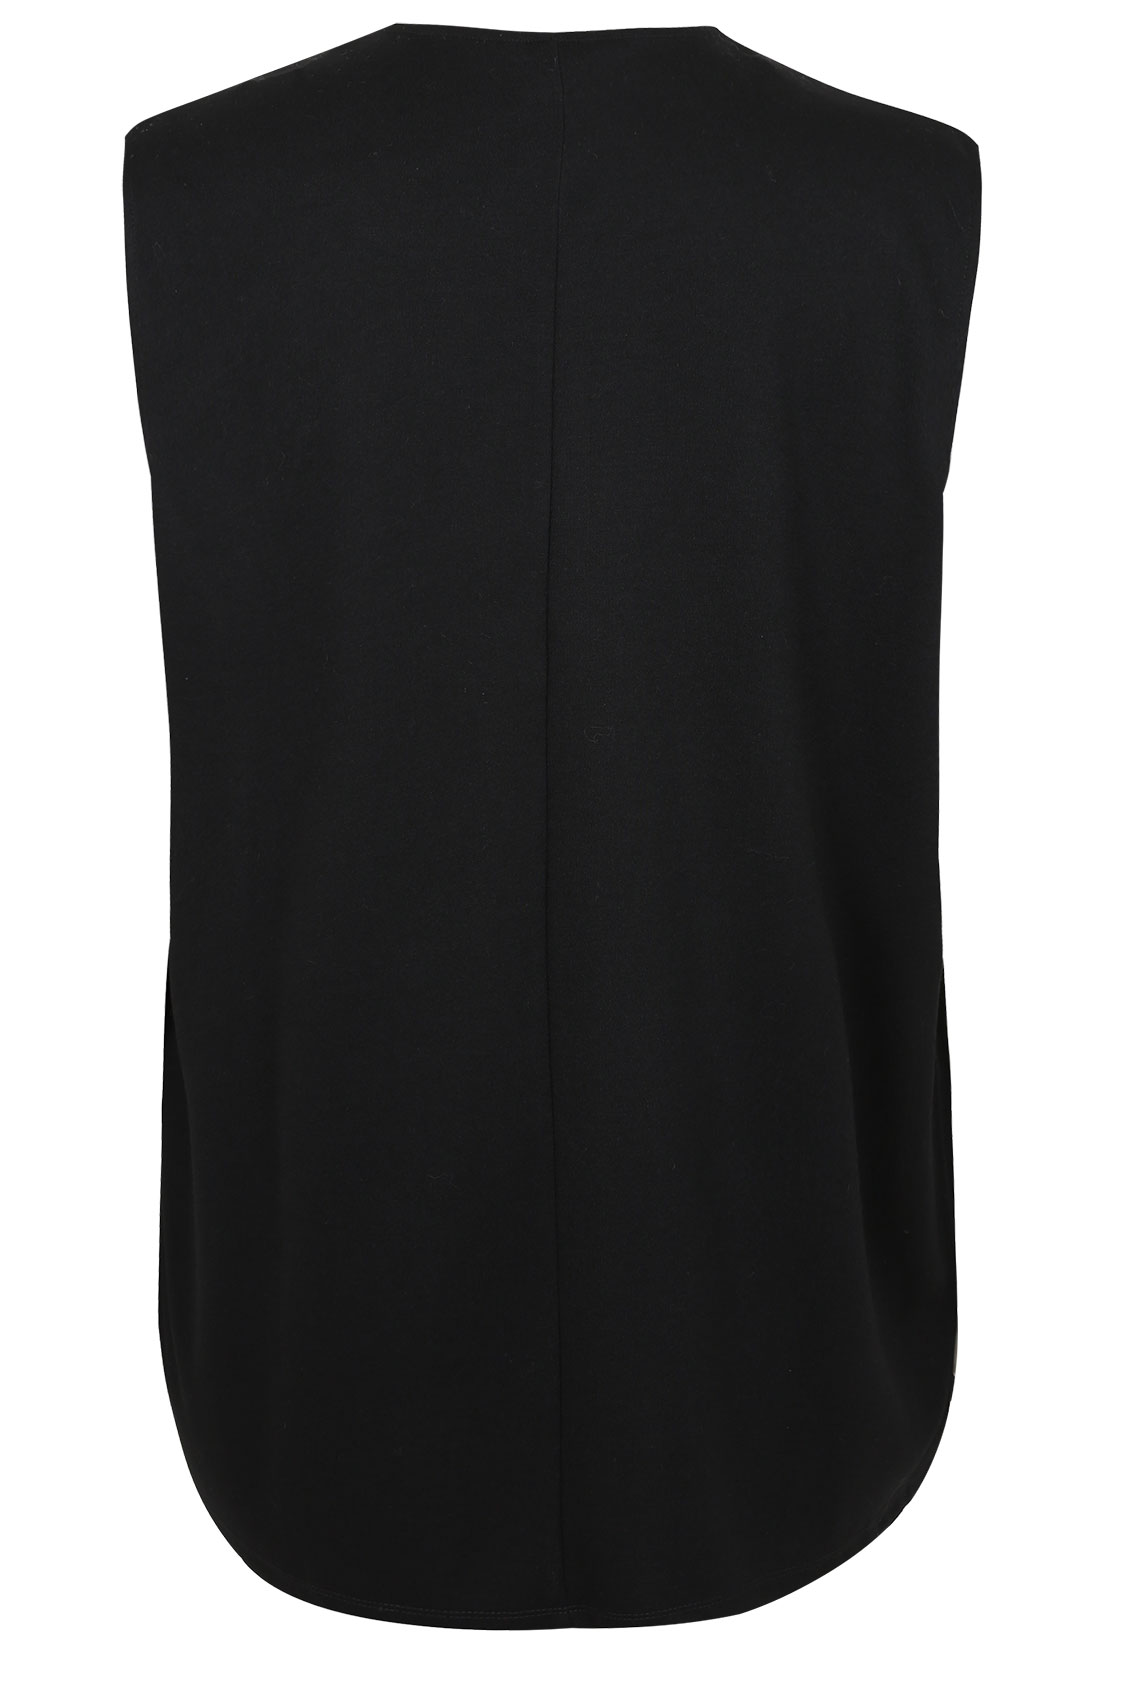 Black Sleeveless Longline Waistcoat With Waterfall Front plus Size 16 to 32